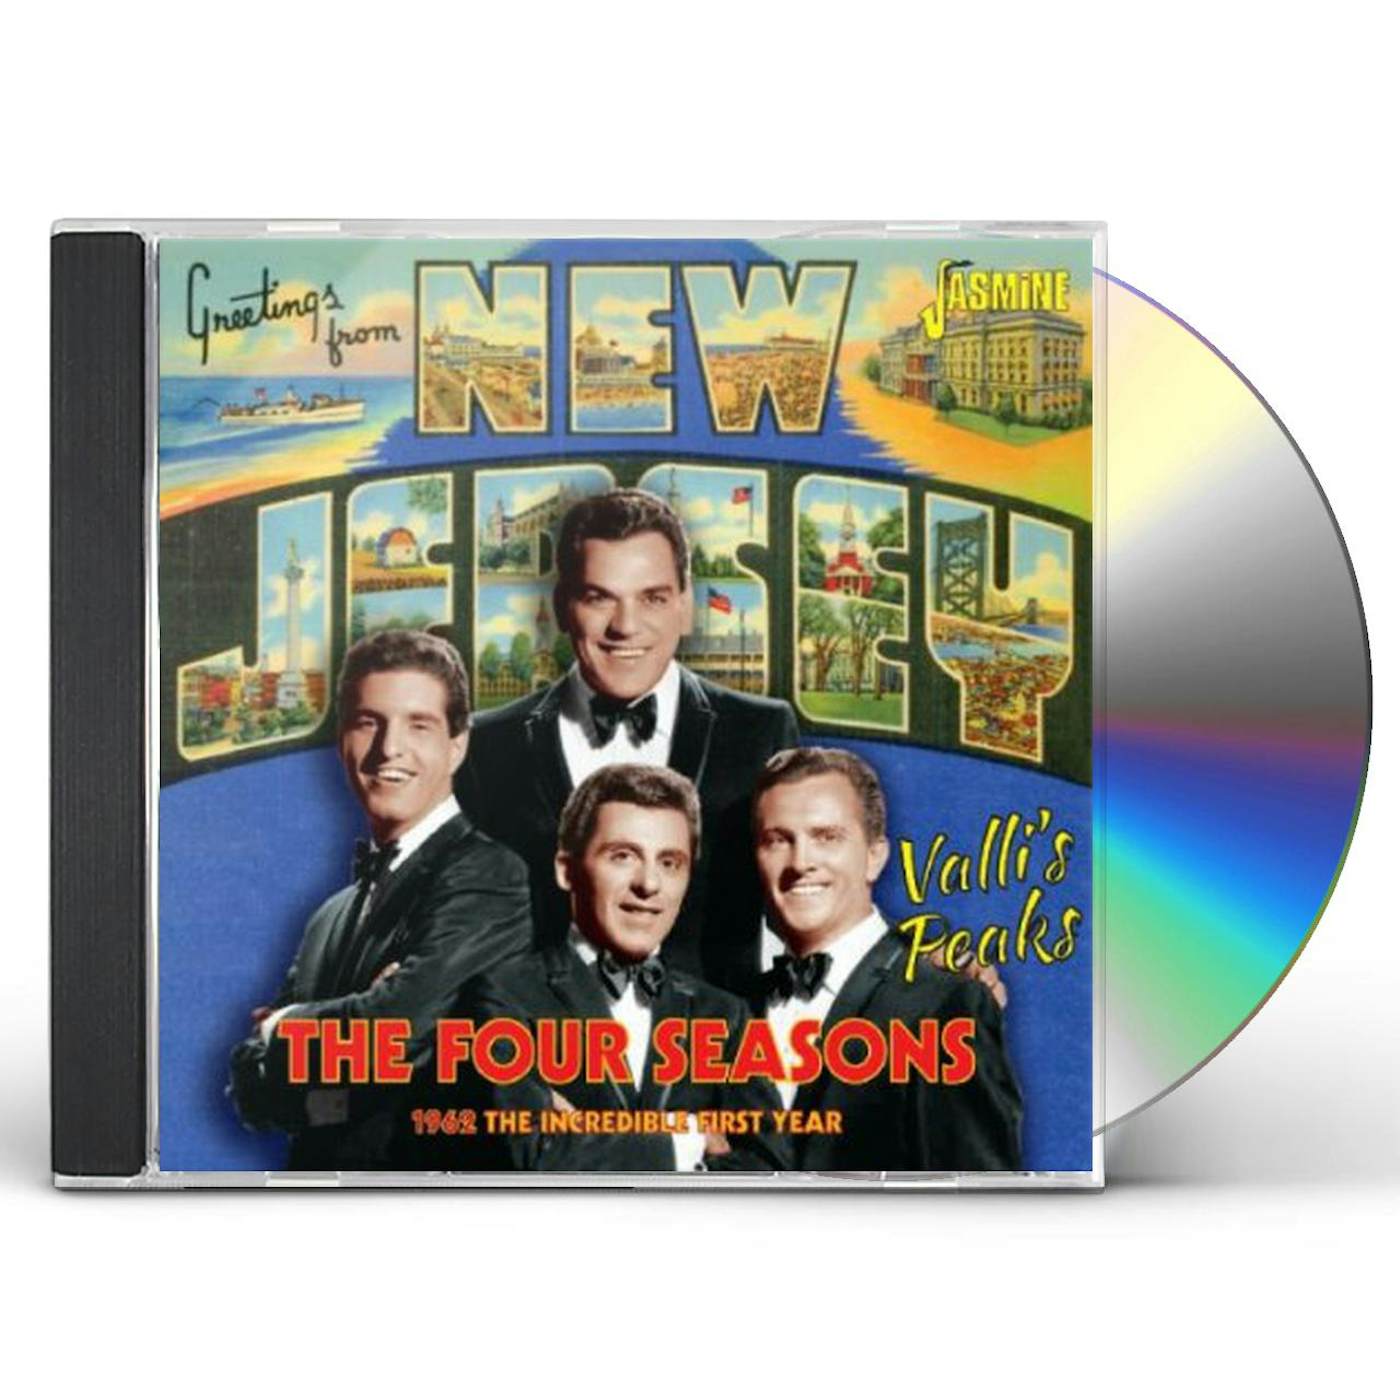 Four Seasons VALLI'S PEAKS:1962 THE INCREDIBLE FIRST YEAR CD